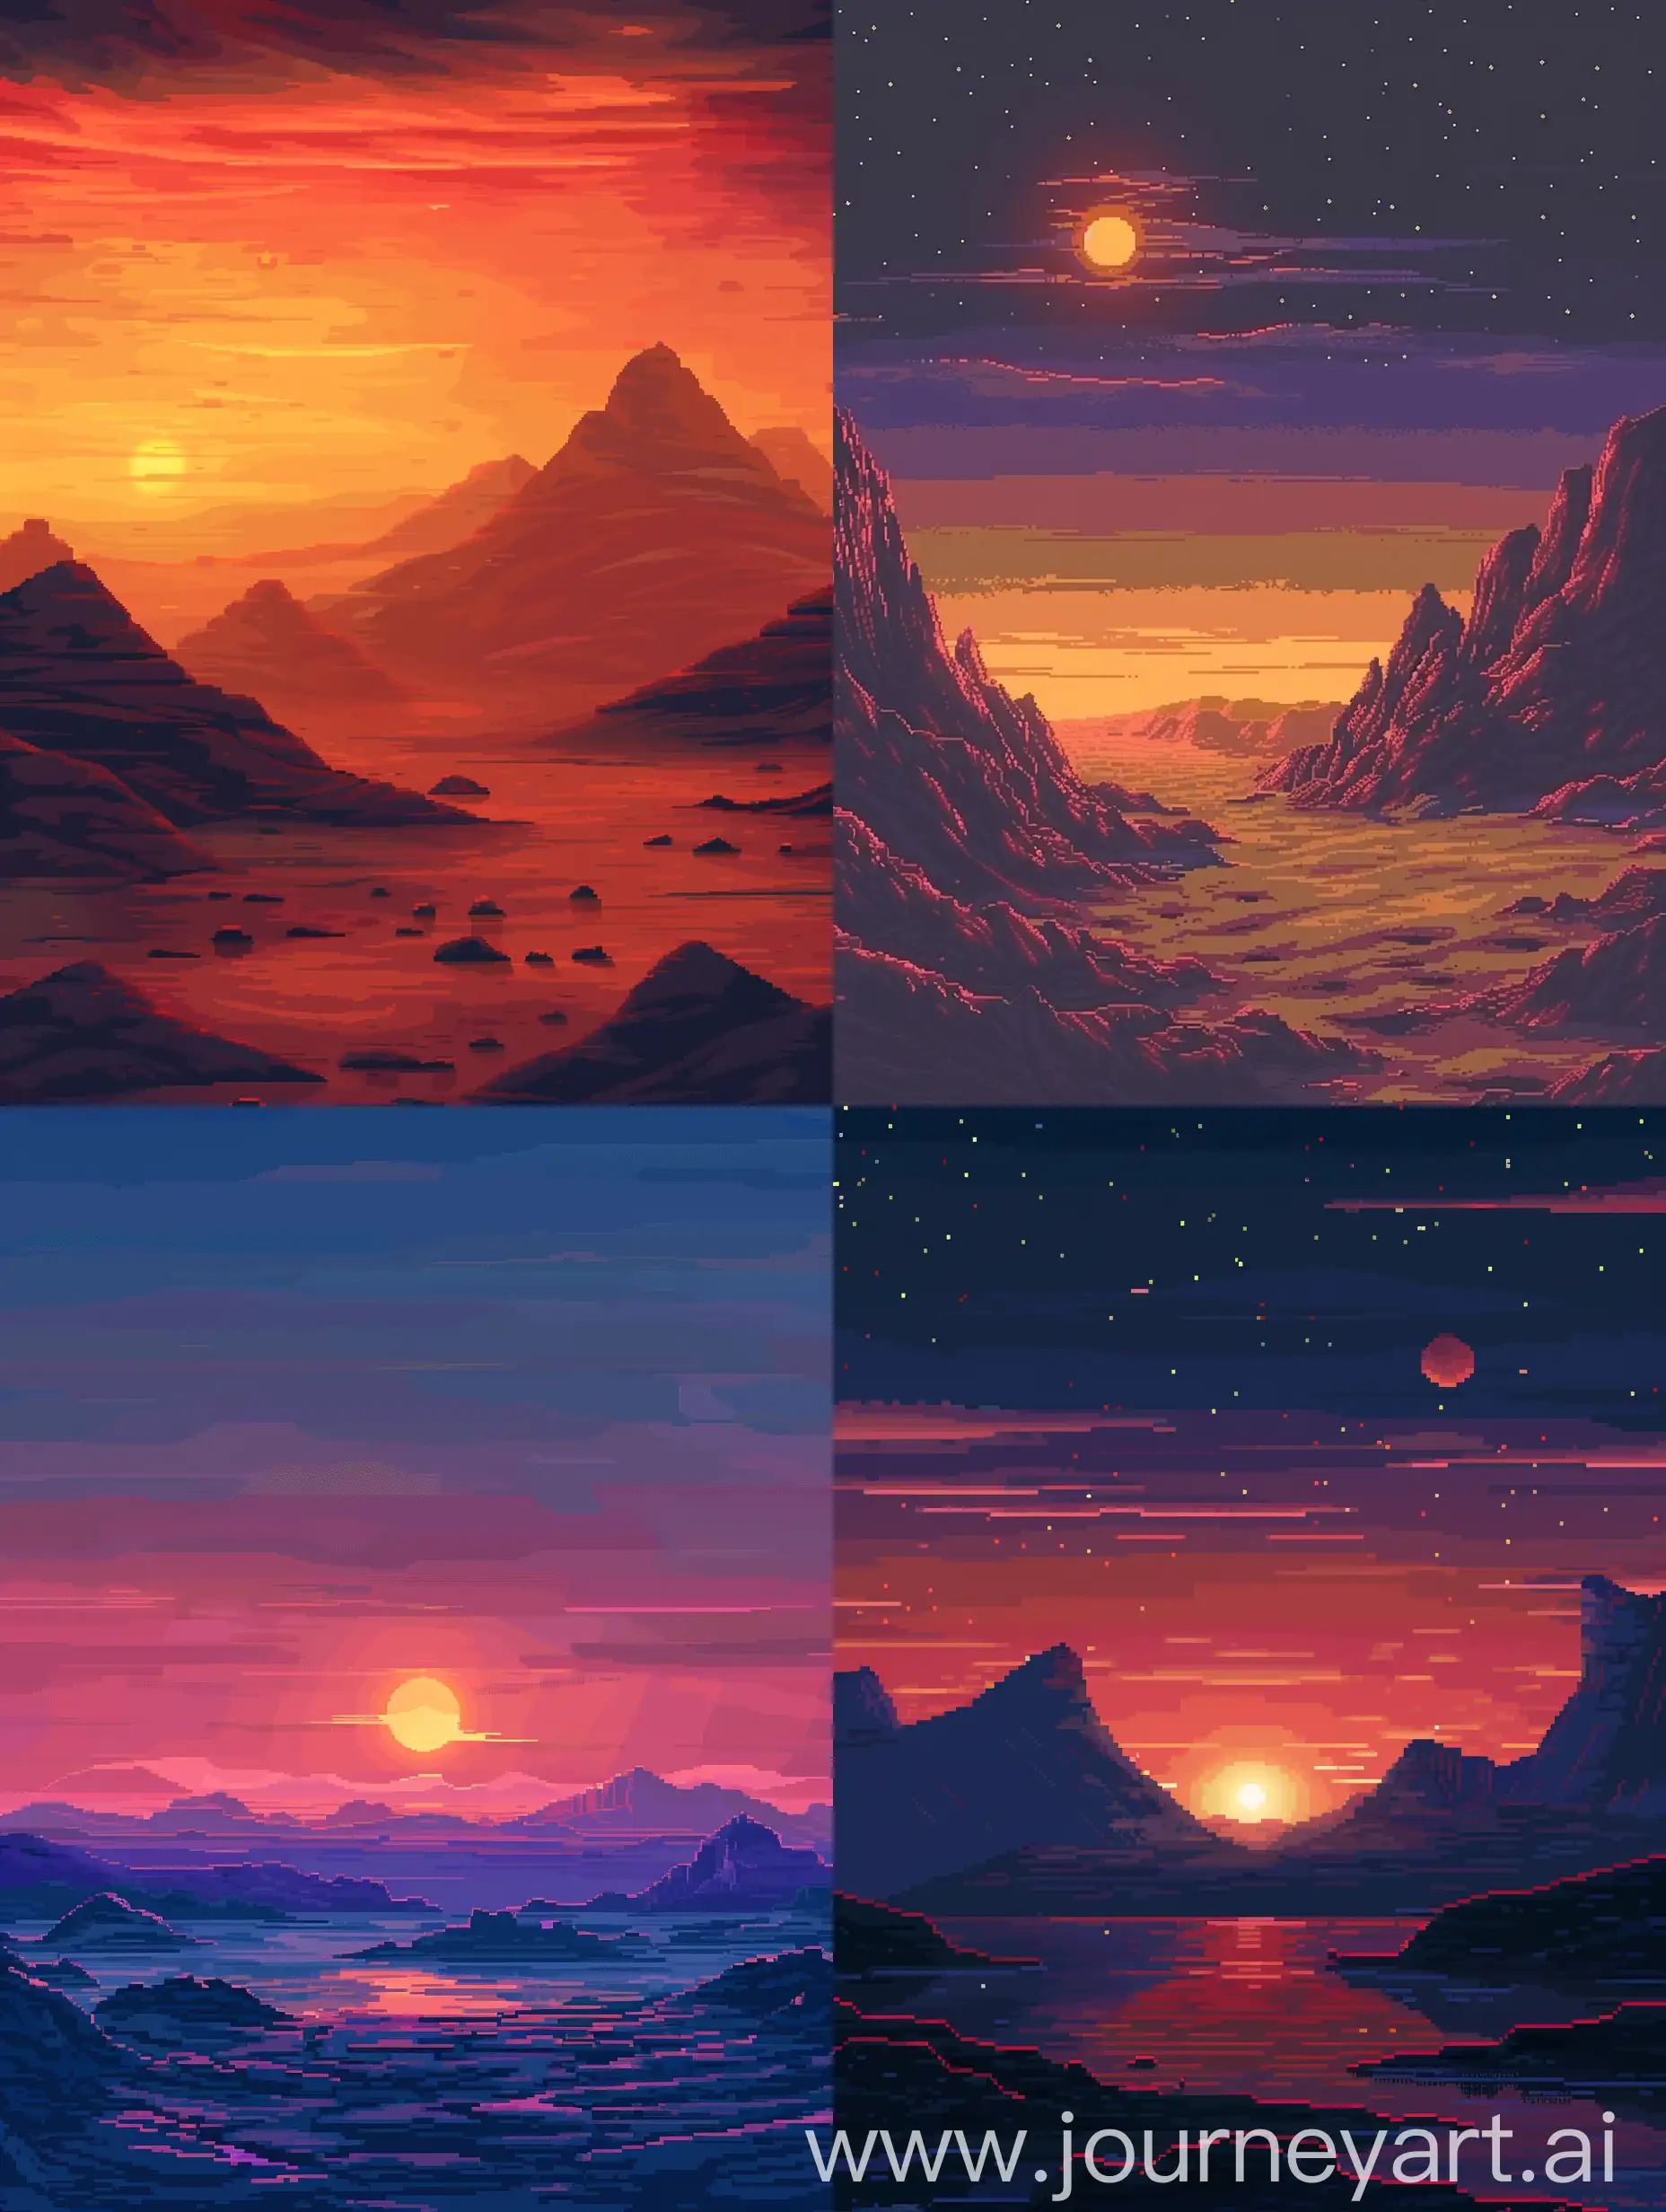 Pixel art. A Desert on unknown planet. Sunset. Mountains